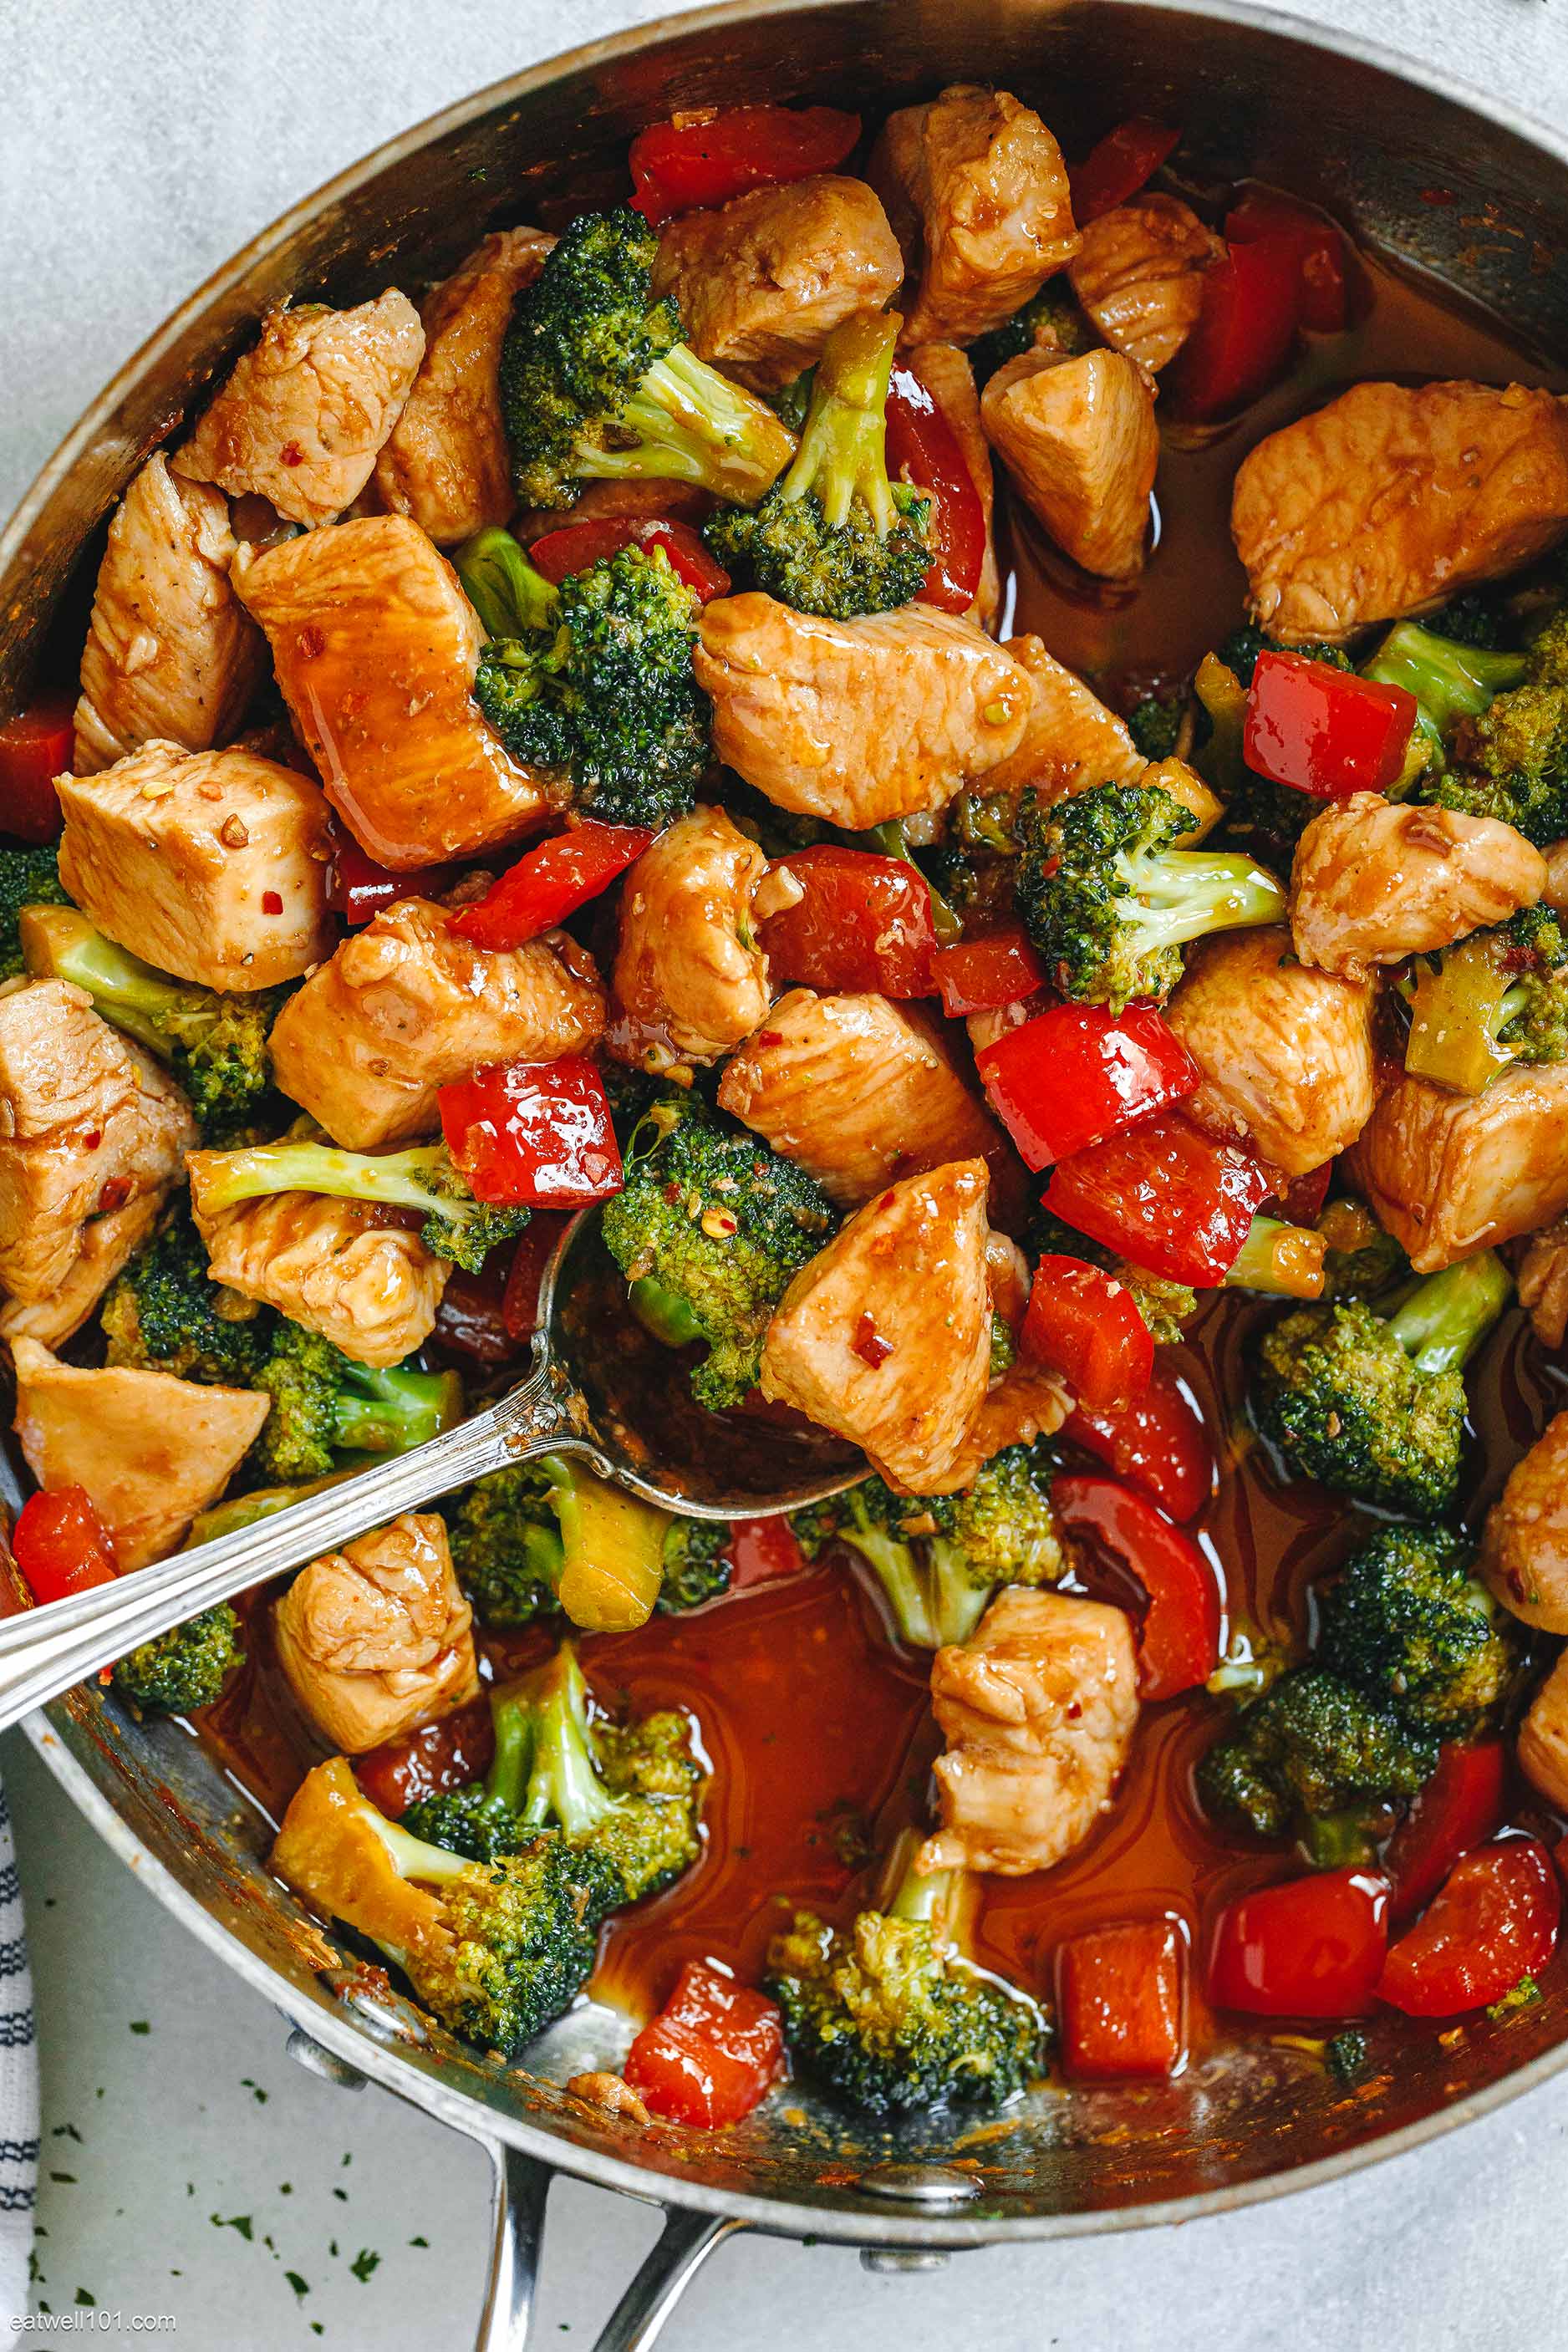 Chicken Stir Fry Recipe With Broccoli And Bell Pepper Easy Chicken Stir Fry Recipe — Eatwell101